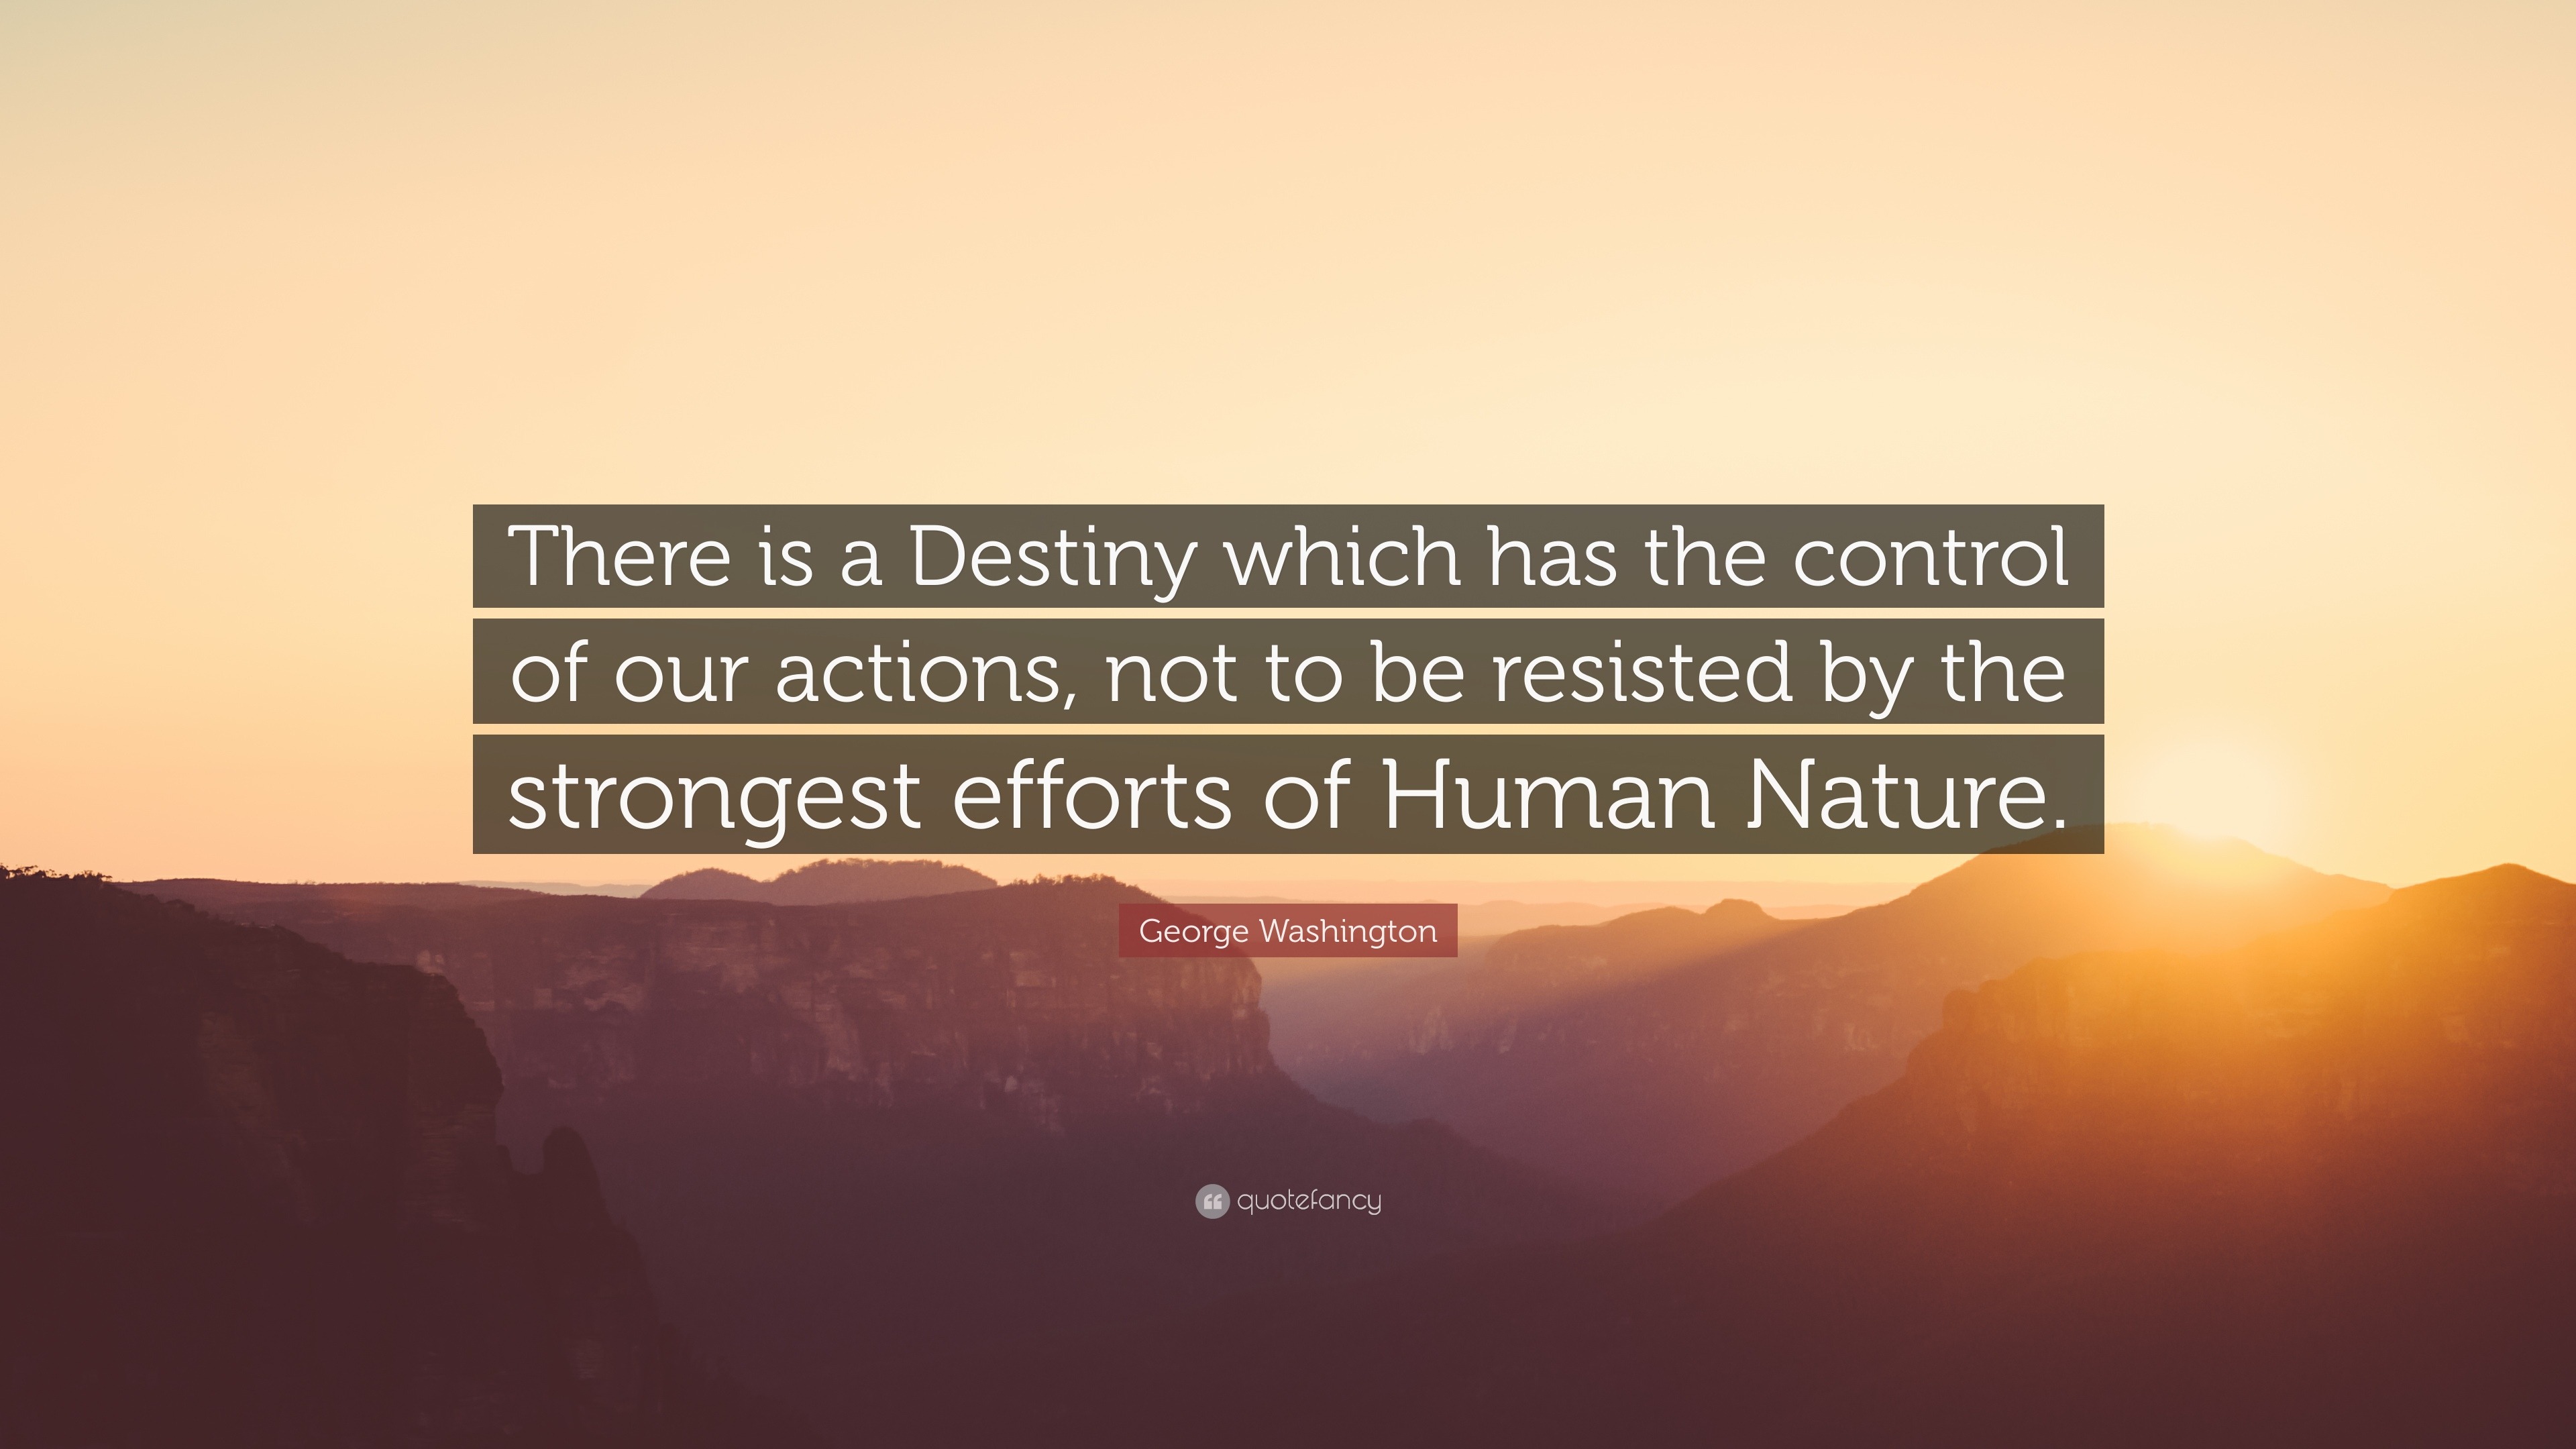 Washington Quote “There is a Destiny which has the